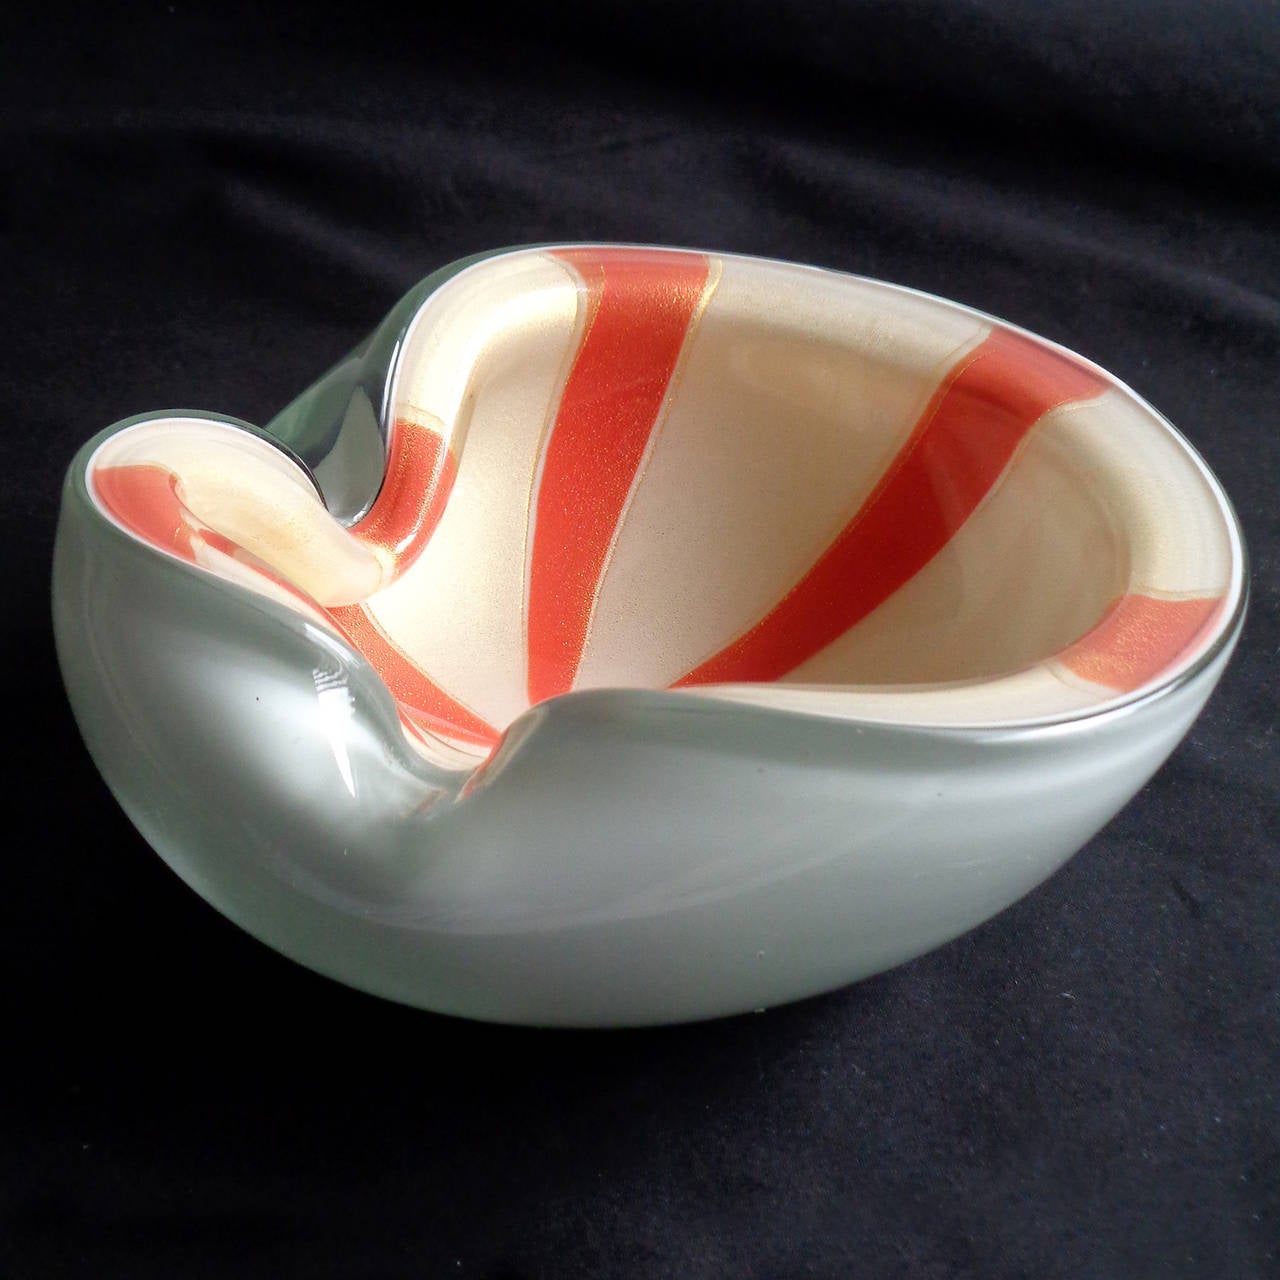 Free shipping worldwide! See details below description.

Beautiful Murano handblown orange stripes, white and gold flecks art glass bowl. Documented to designer Alfredo Barbini. The piece has bright orange stripes, and filled with gold leaf on the